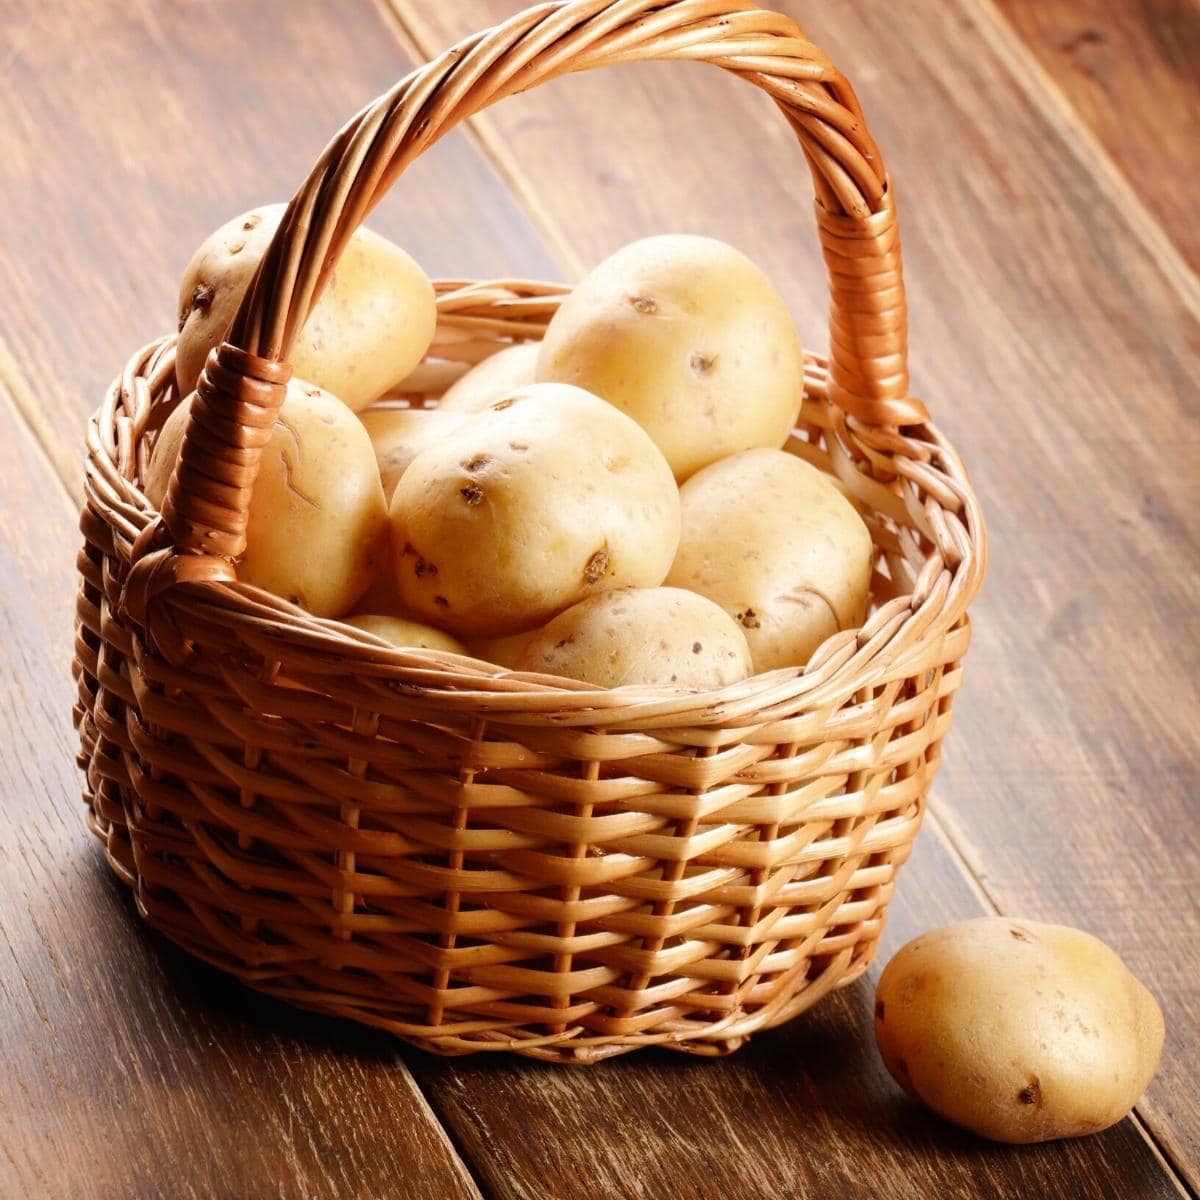 A large wooden basket filled with golden potatoes.